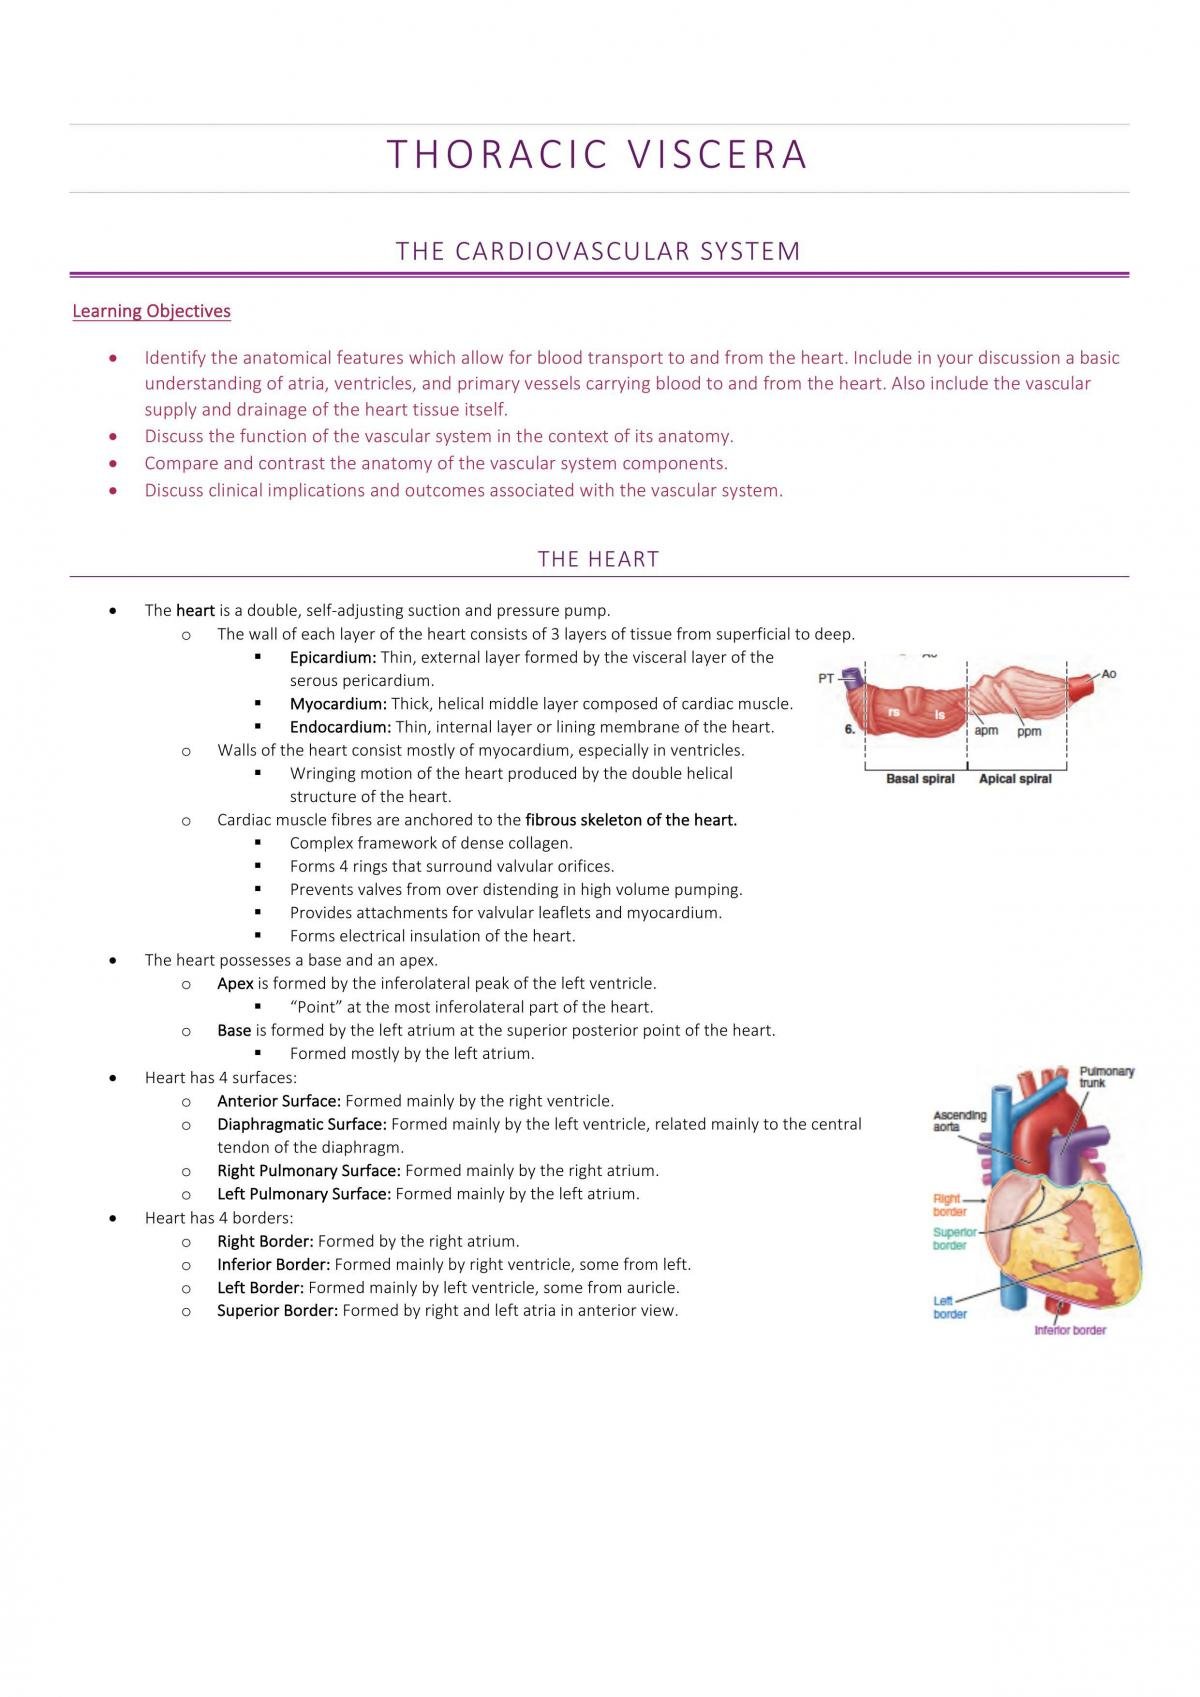 BMS2011 - Thoracic Visceral Anatomy - Page 1